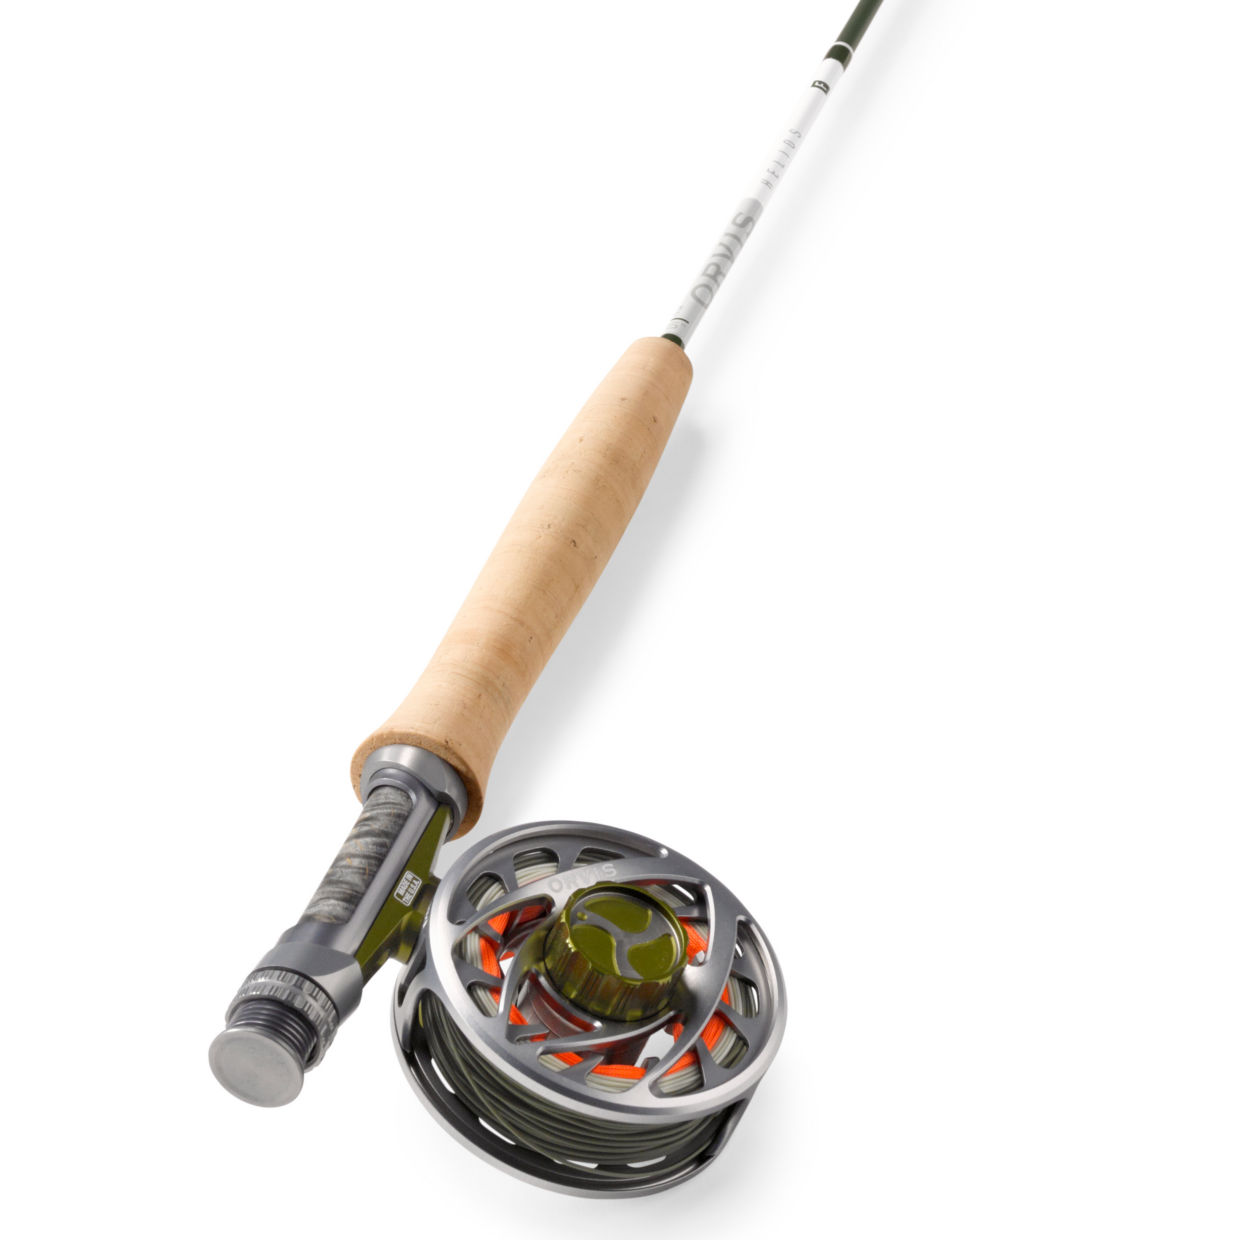 Helios™ F 7'6" 2-Weight Fly Rod Outfit Size 2-Weight. 7'6 Graphite Orvis